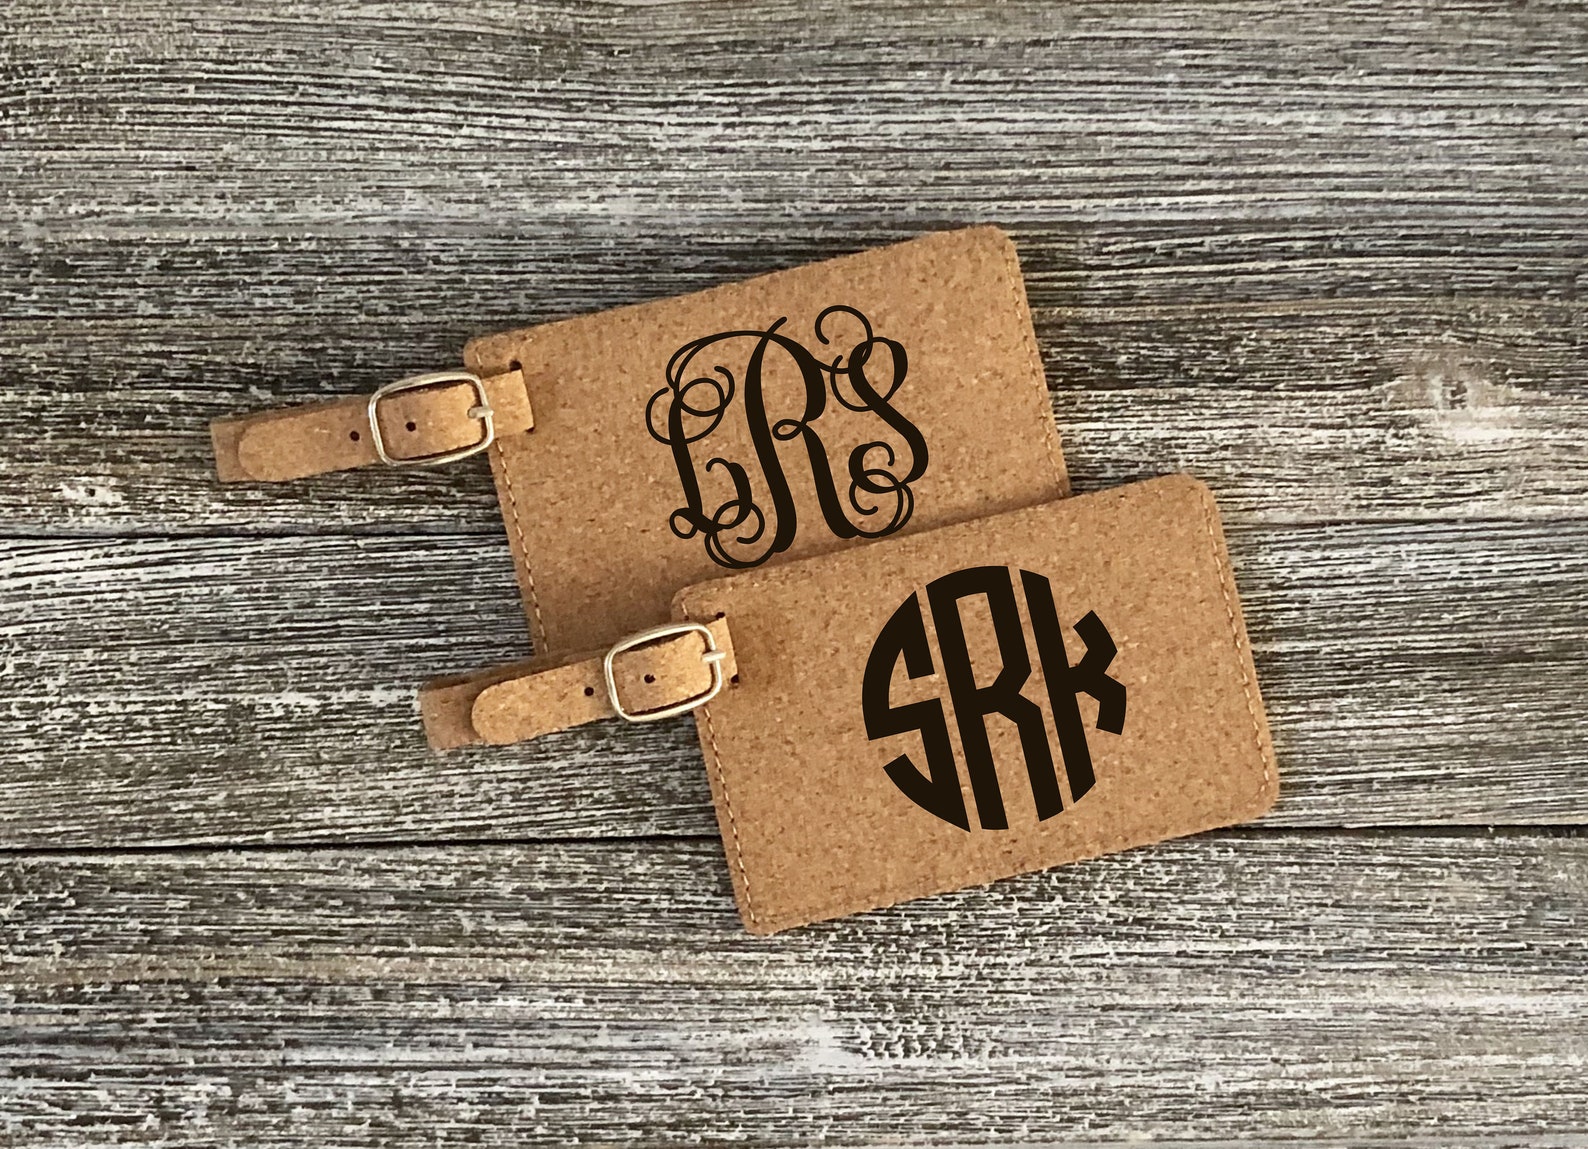 personalized cork luggage tags with formal monograms